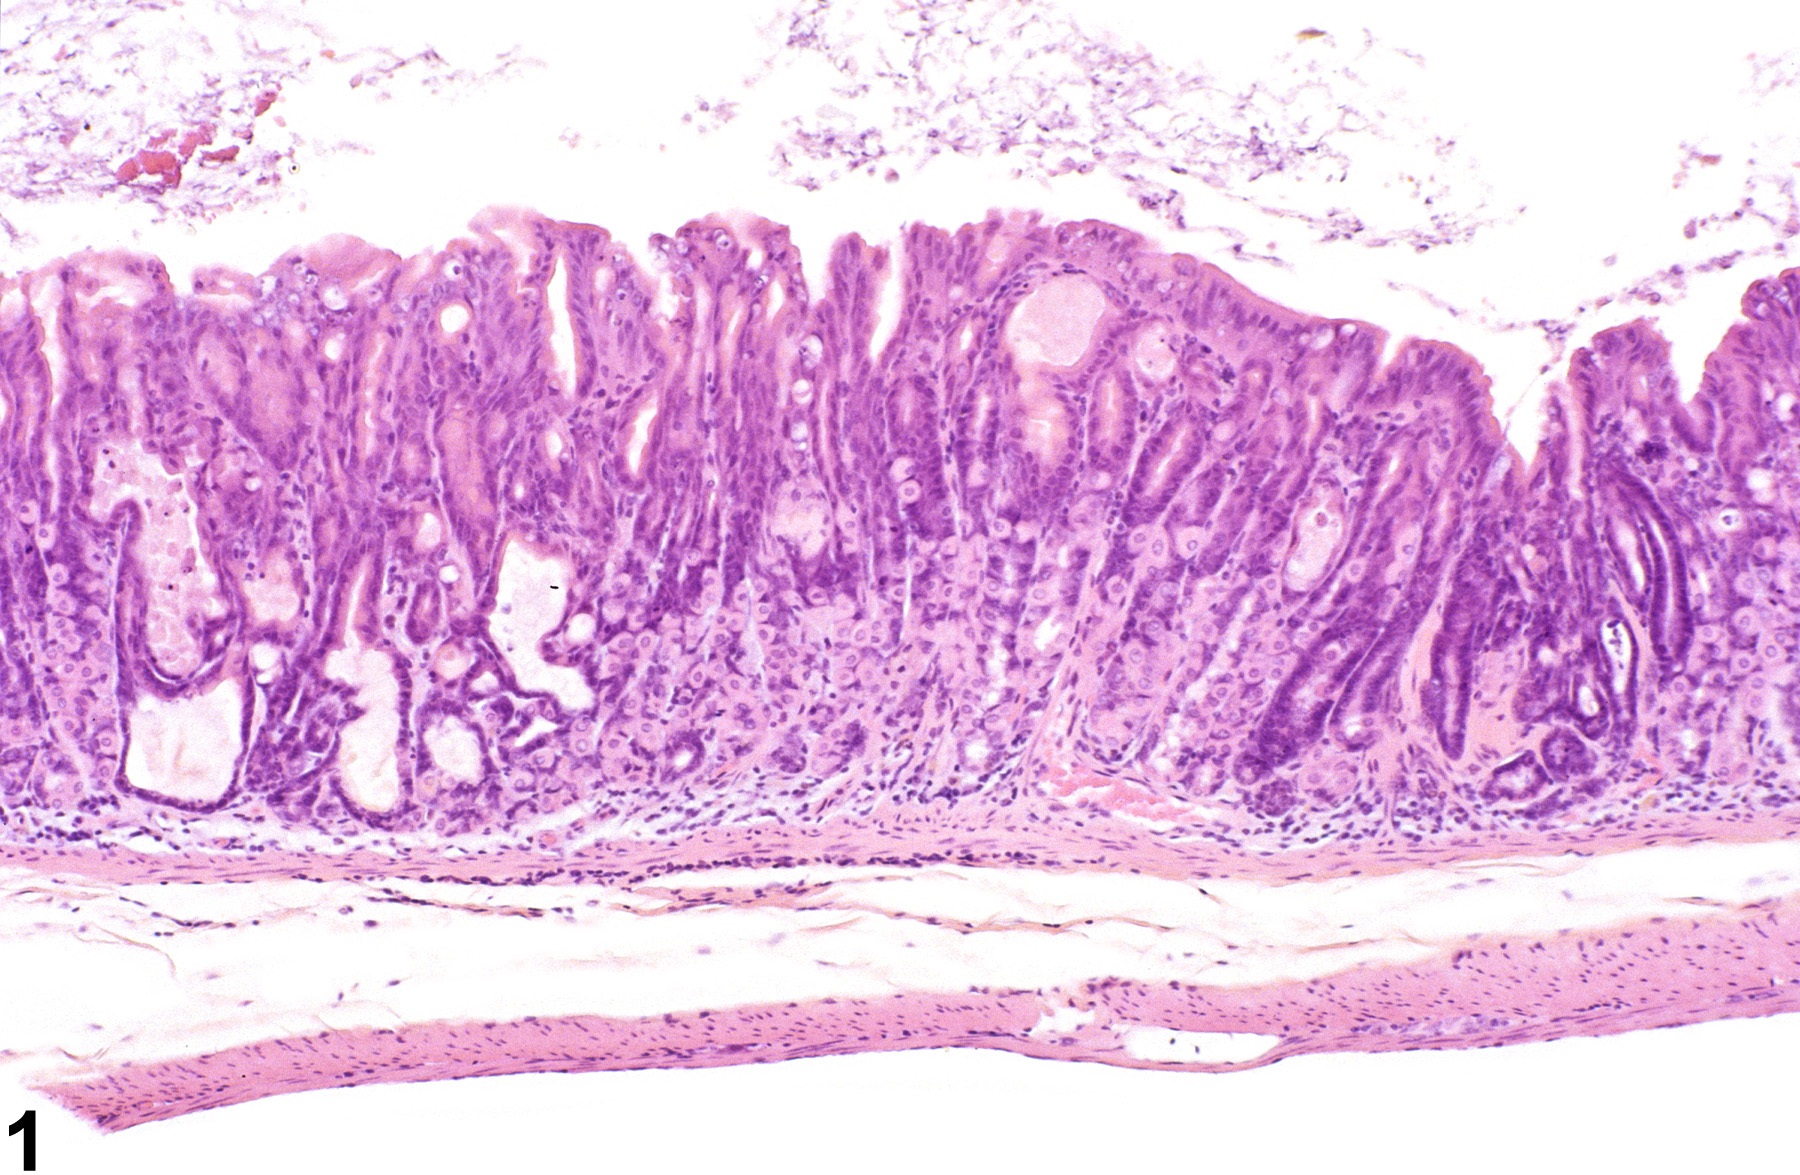 Image of dilation in the glandular stomach glands from a male B6C3F1 mouse in a chronic study